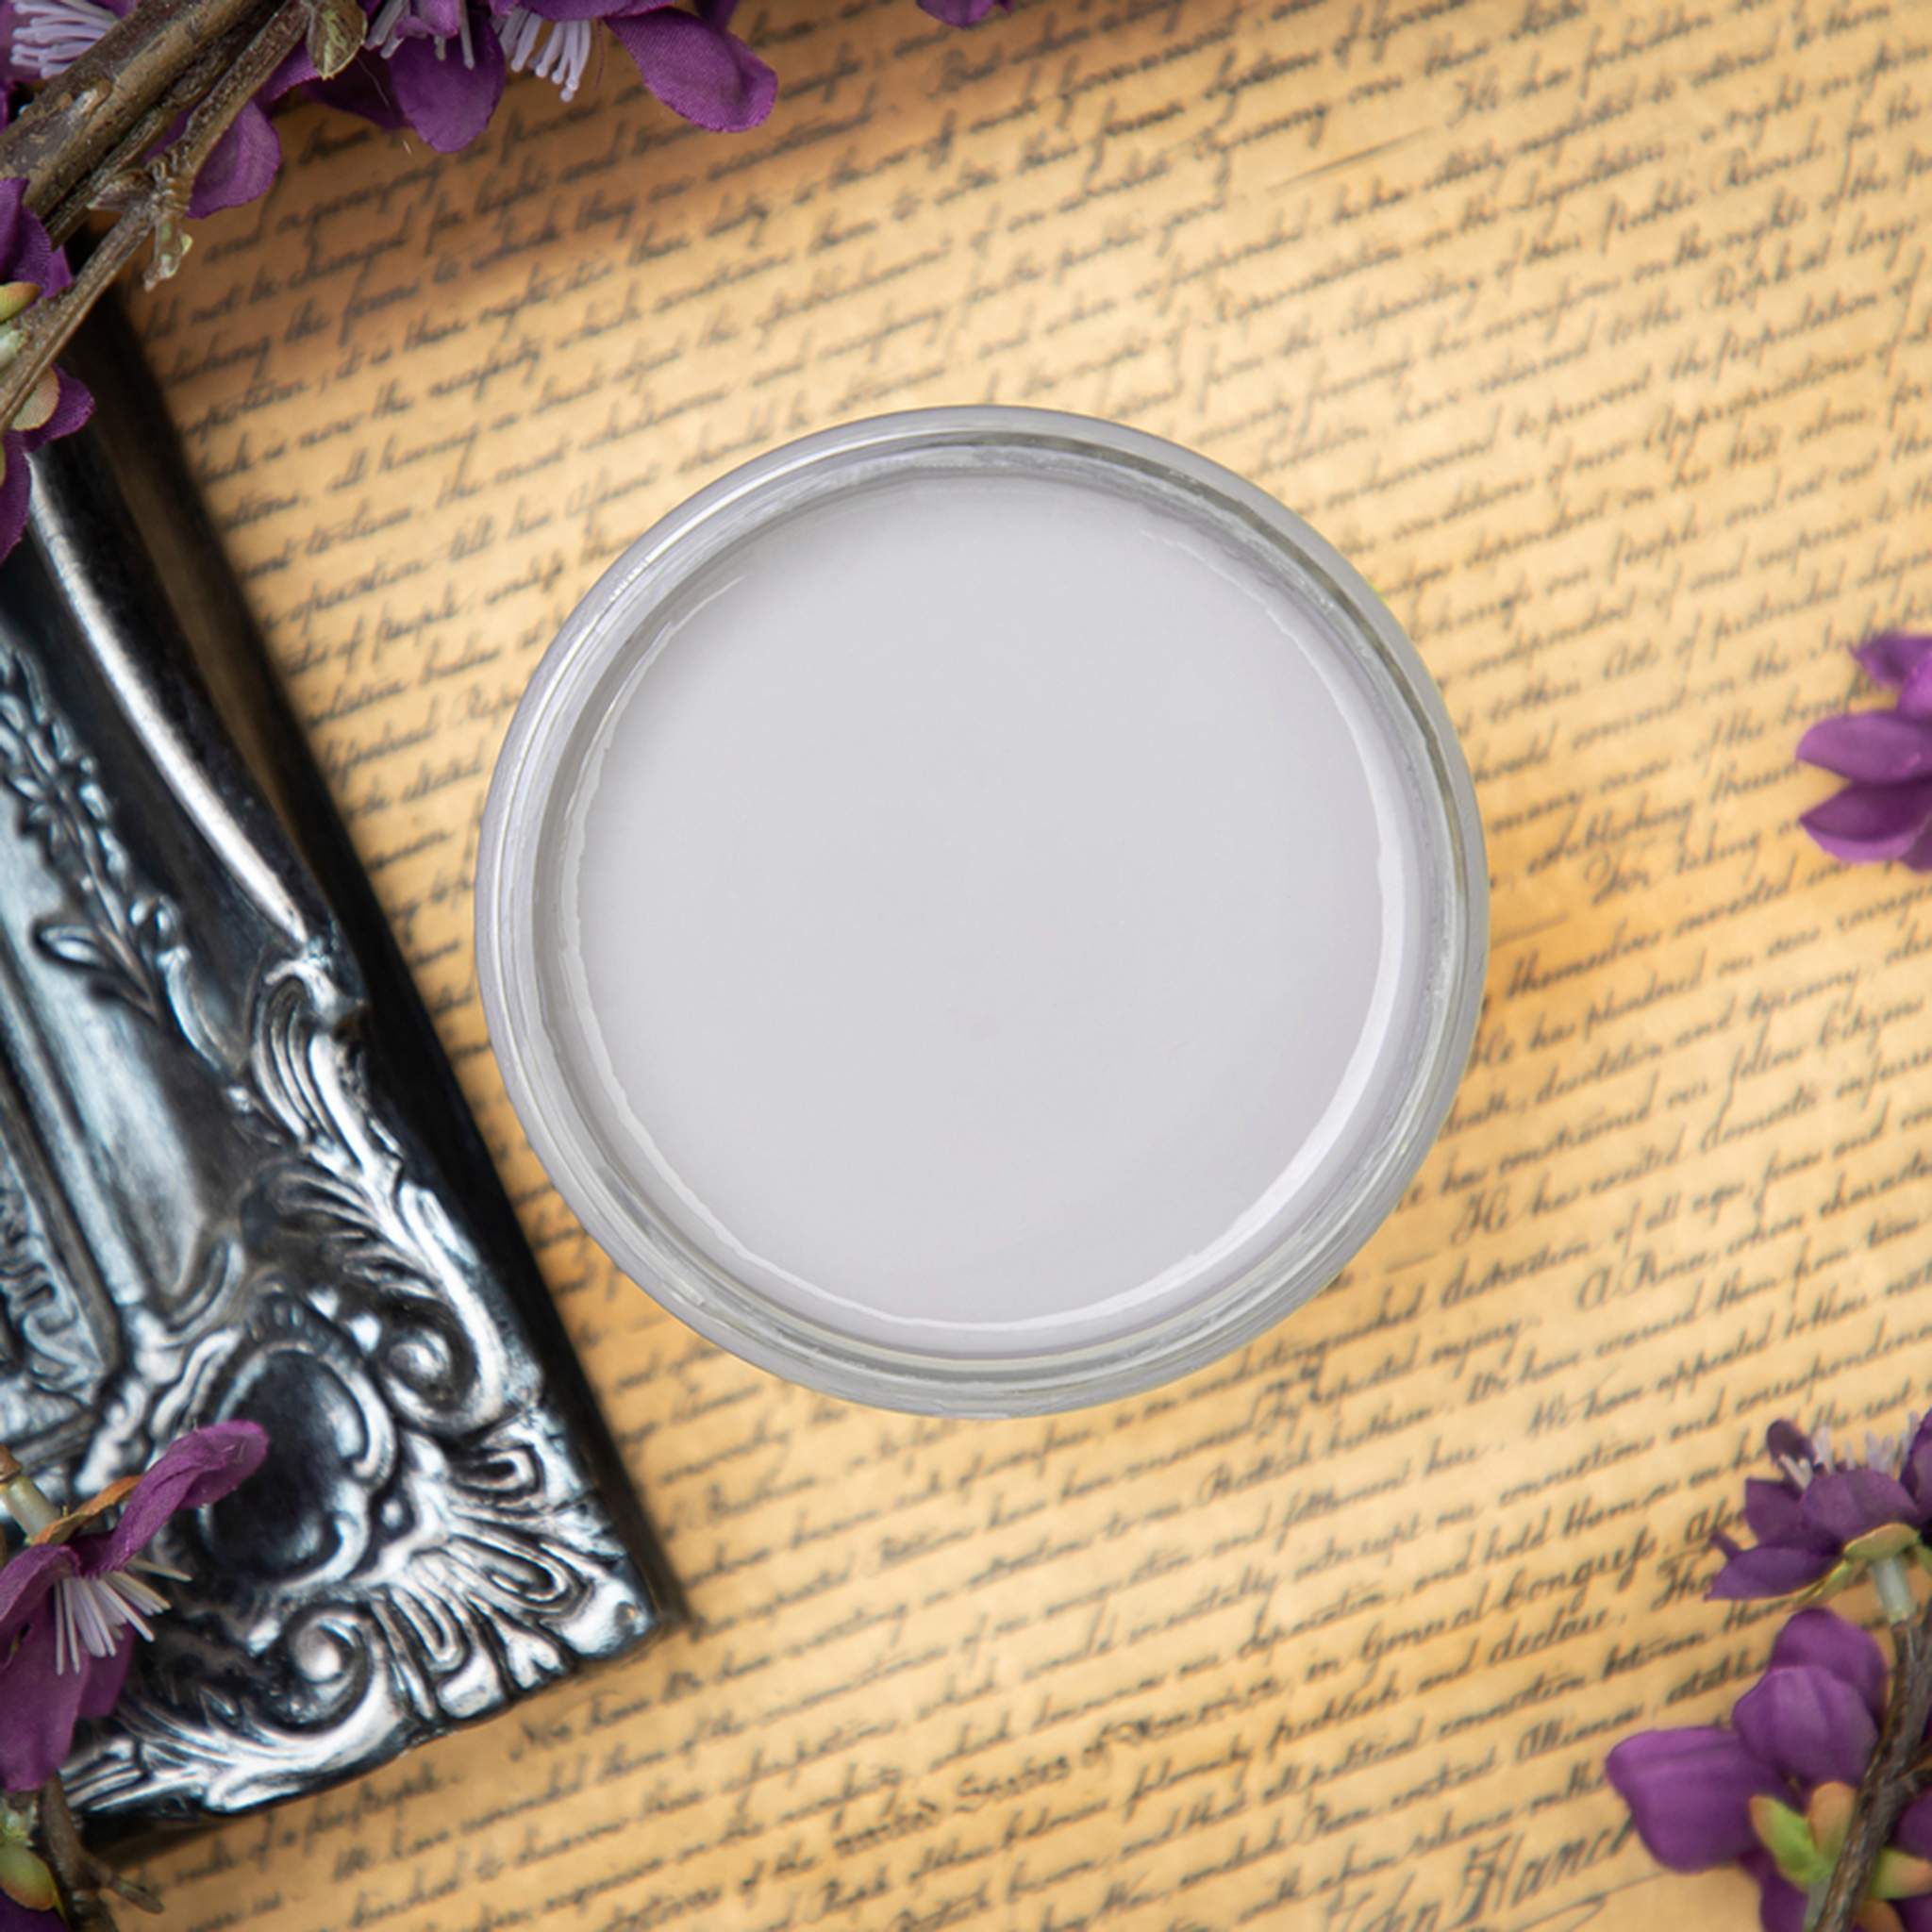 An arial view of an open container of Dixie Belle Paint Company’s Mason Dixon Chalk Mineral Paint is sitting on old parchment with script on it and surrounded by small purple silk flowers and a silver photo frame.